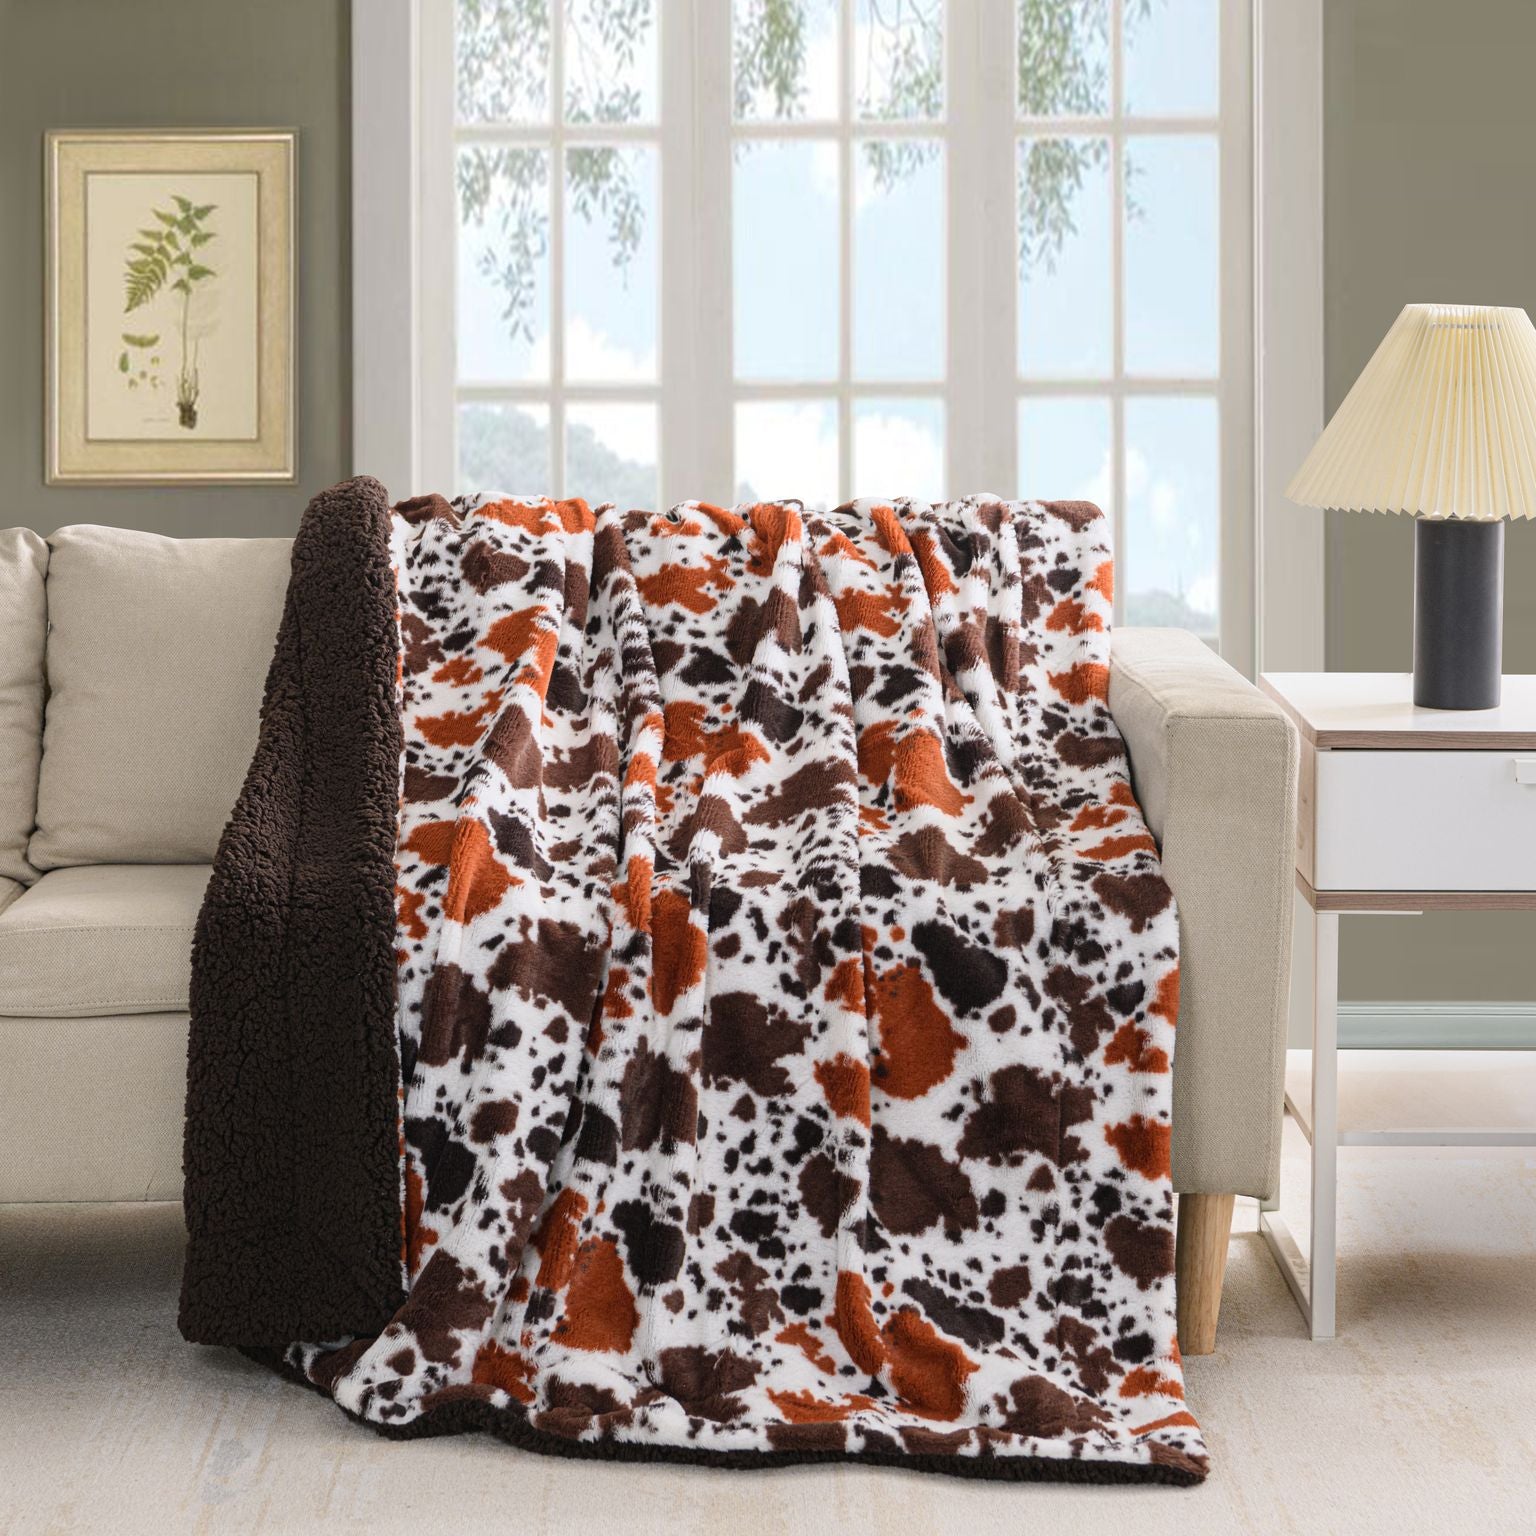 Printed Fur to Sherpa Throw Blanket 50 x 60 inches Cowhide to Dark Brown